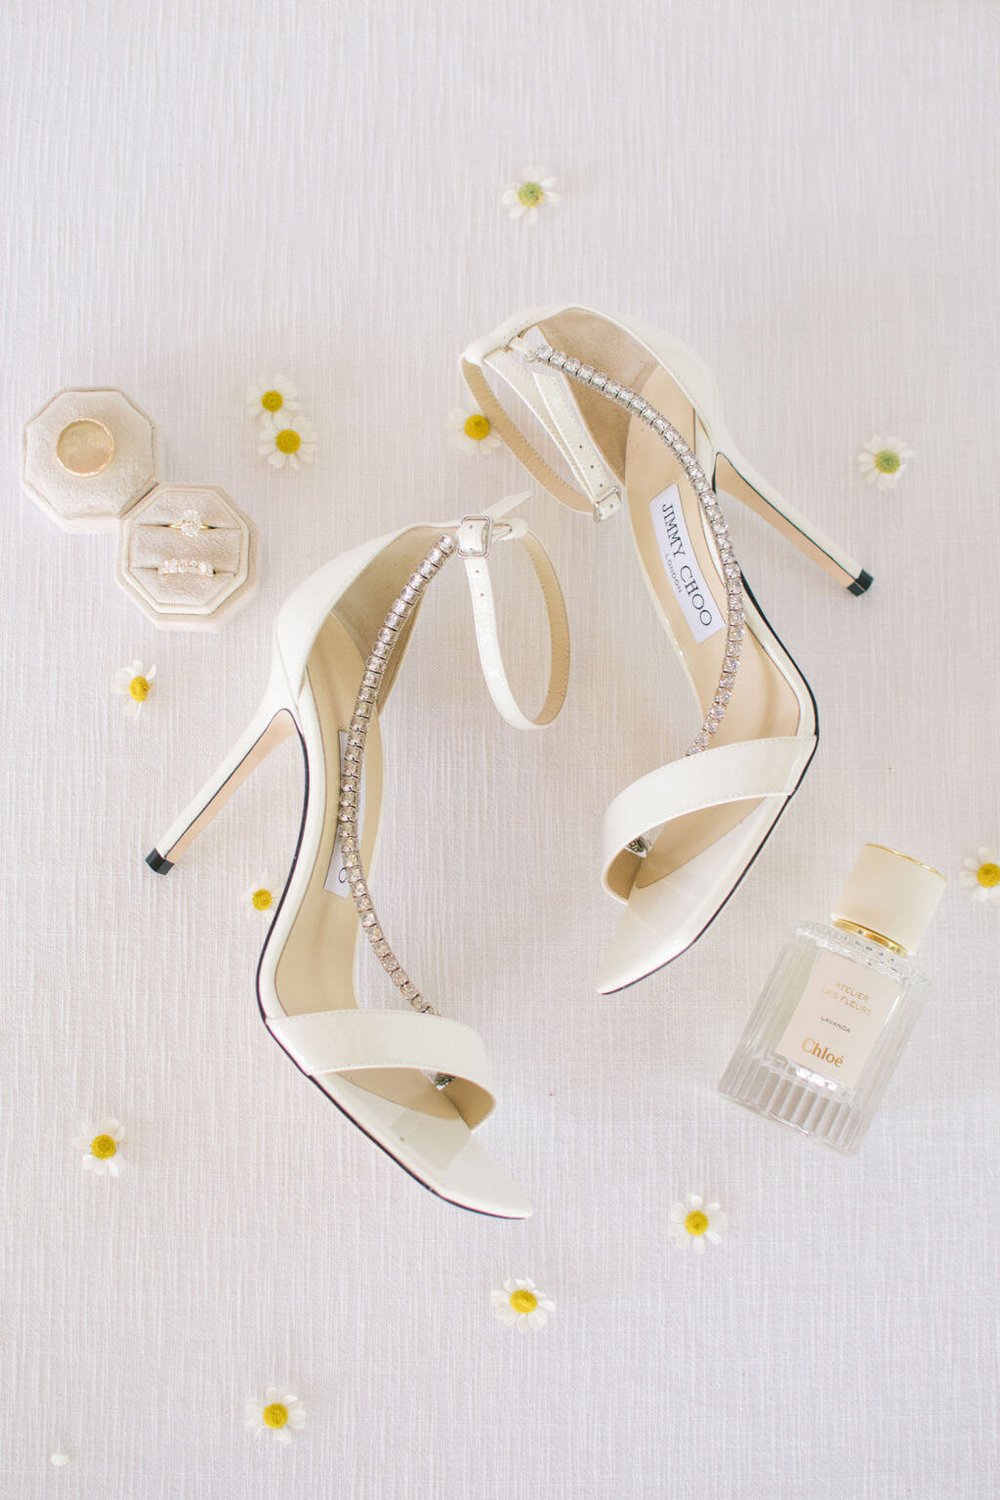 Bride's Jimmy Choo heels for her wedding day at The Doctor's House in Vaughan, ON